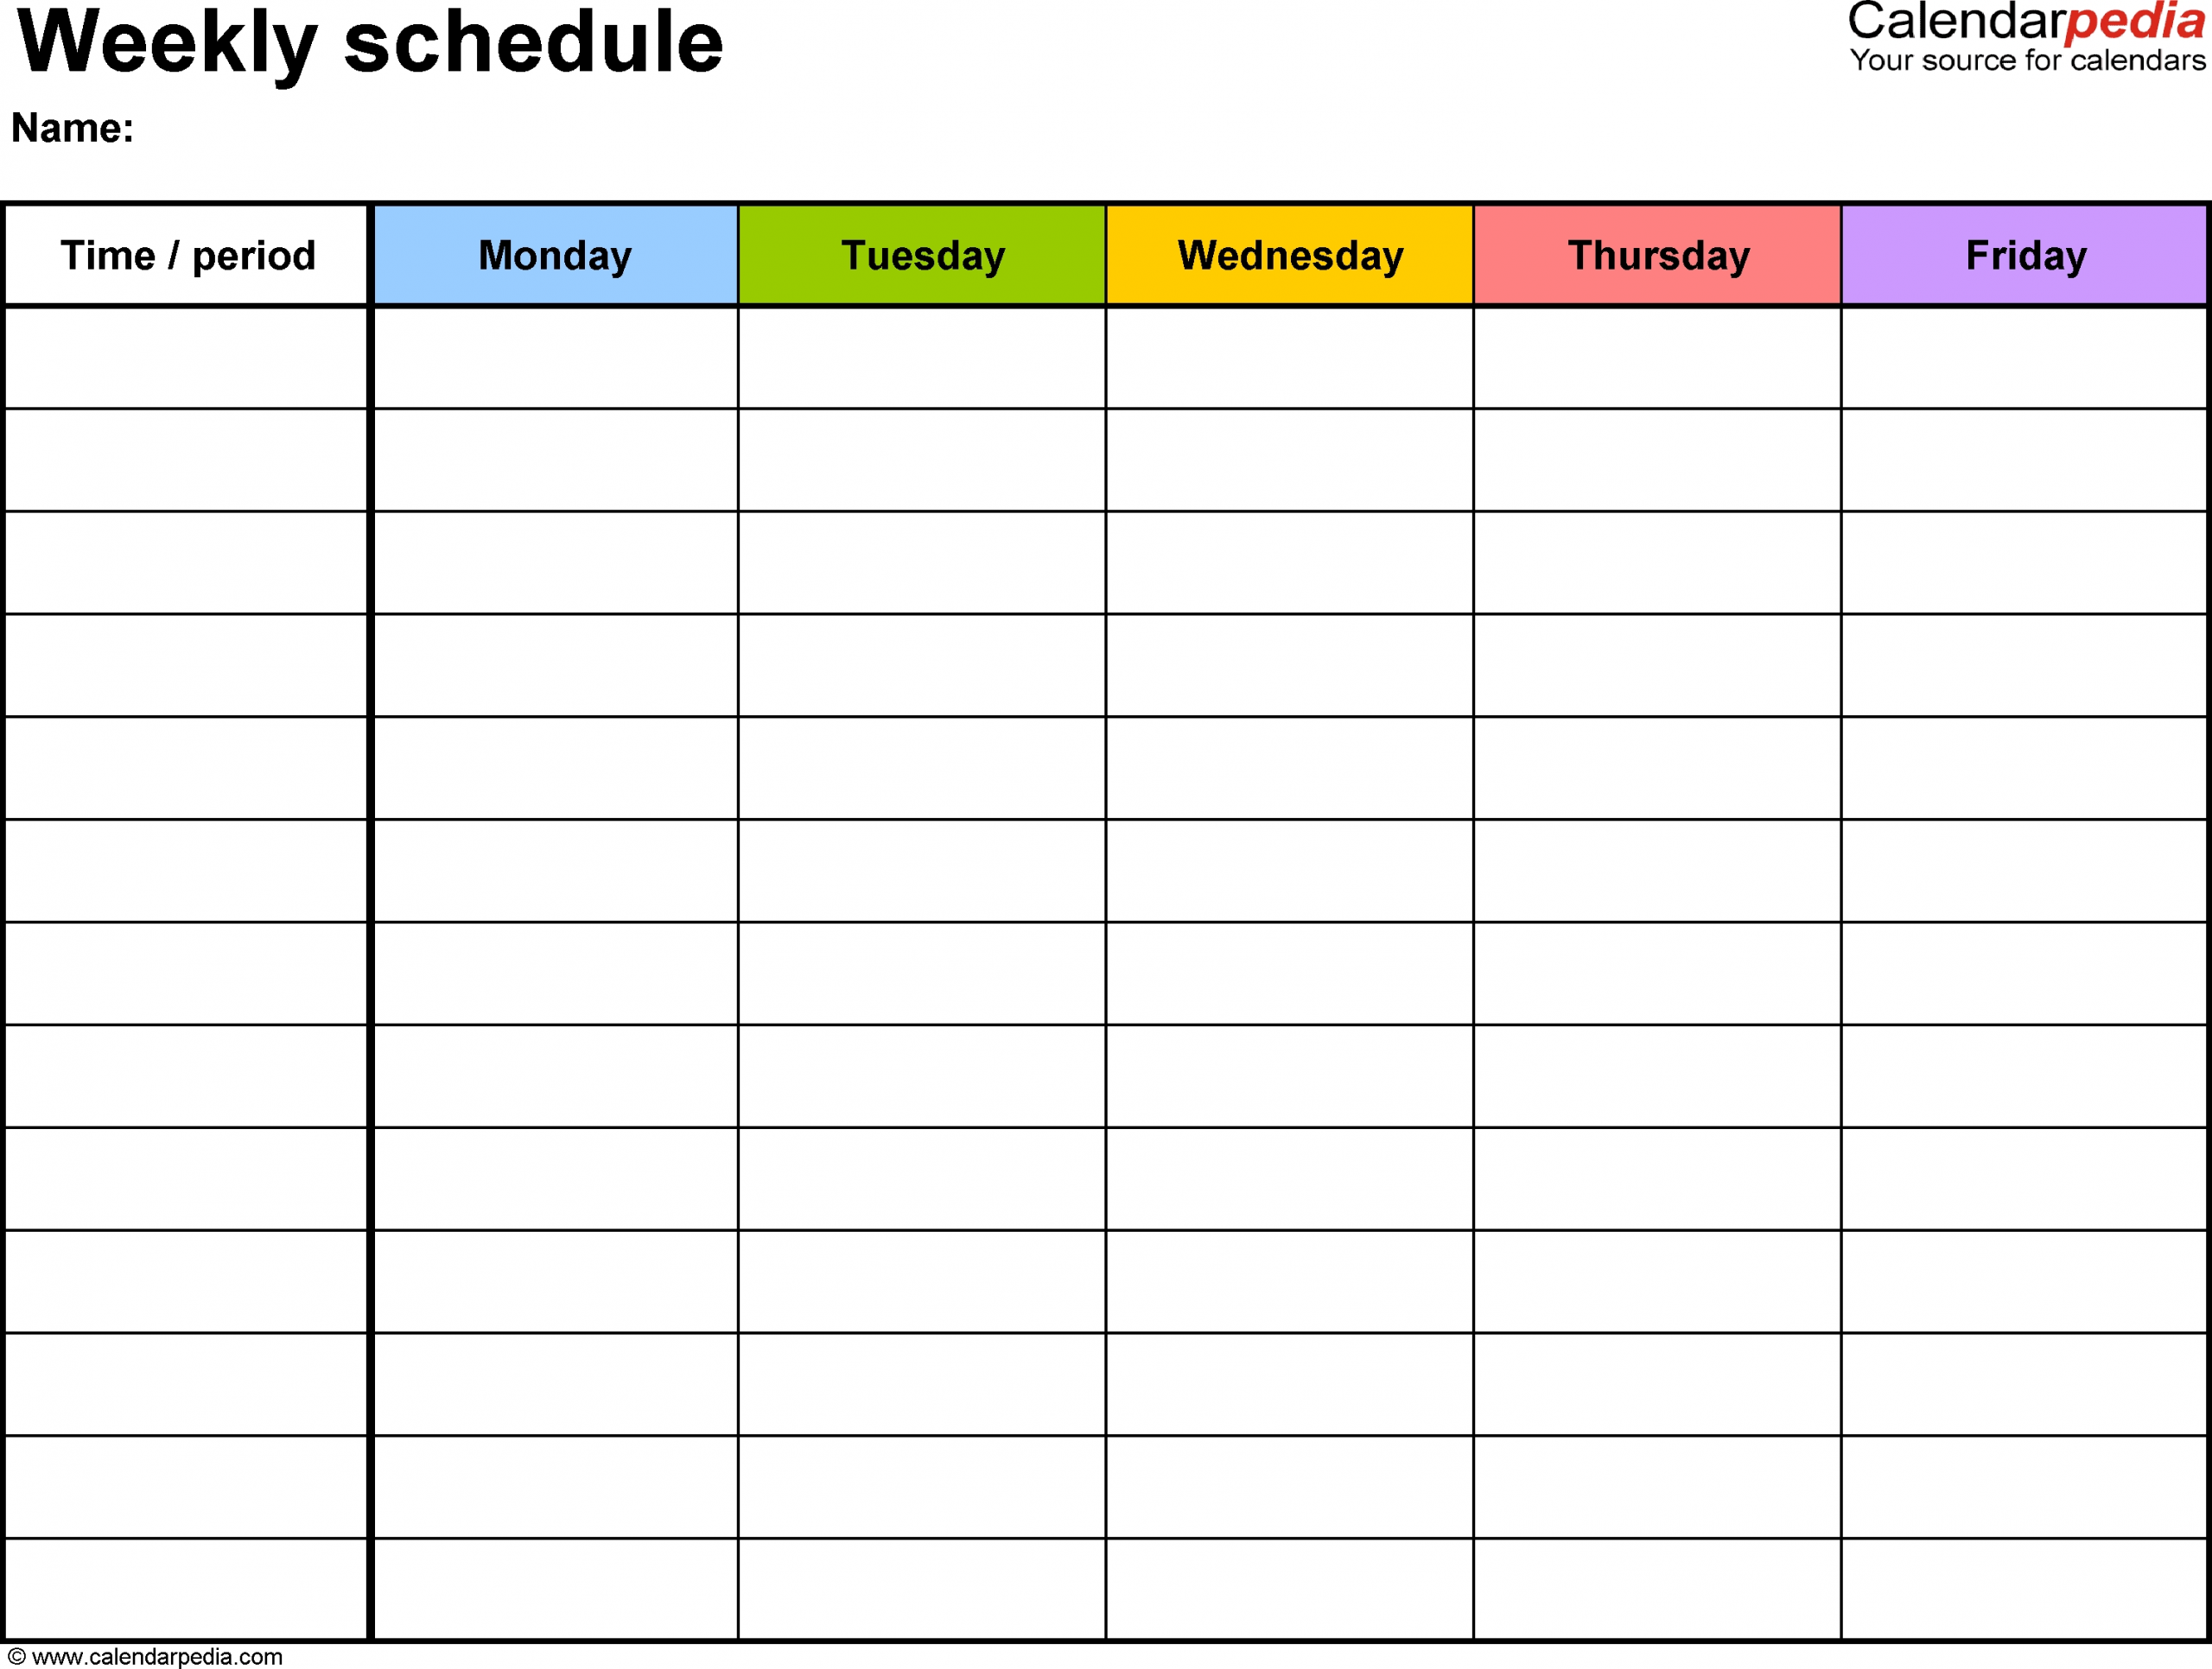 Free Weekly Schedule Templates For Pdf - 18 Templates with regard to Free Printable Weekly Schedule Template